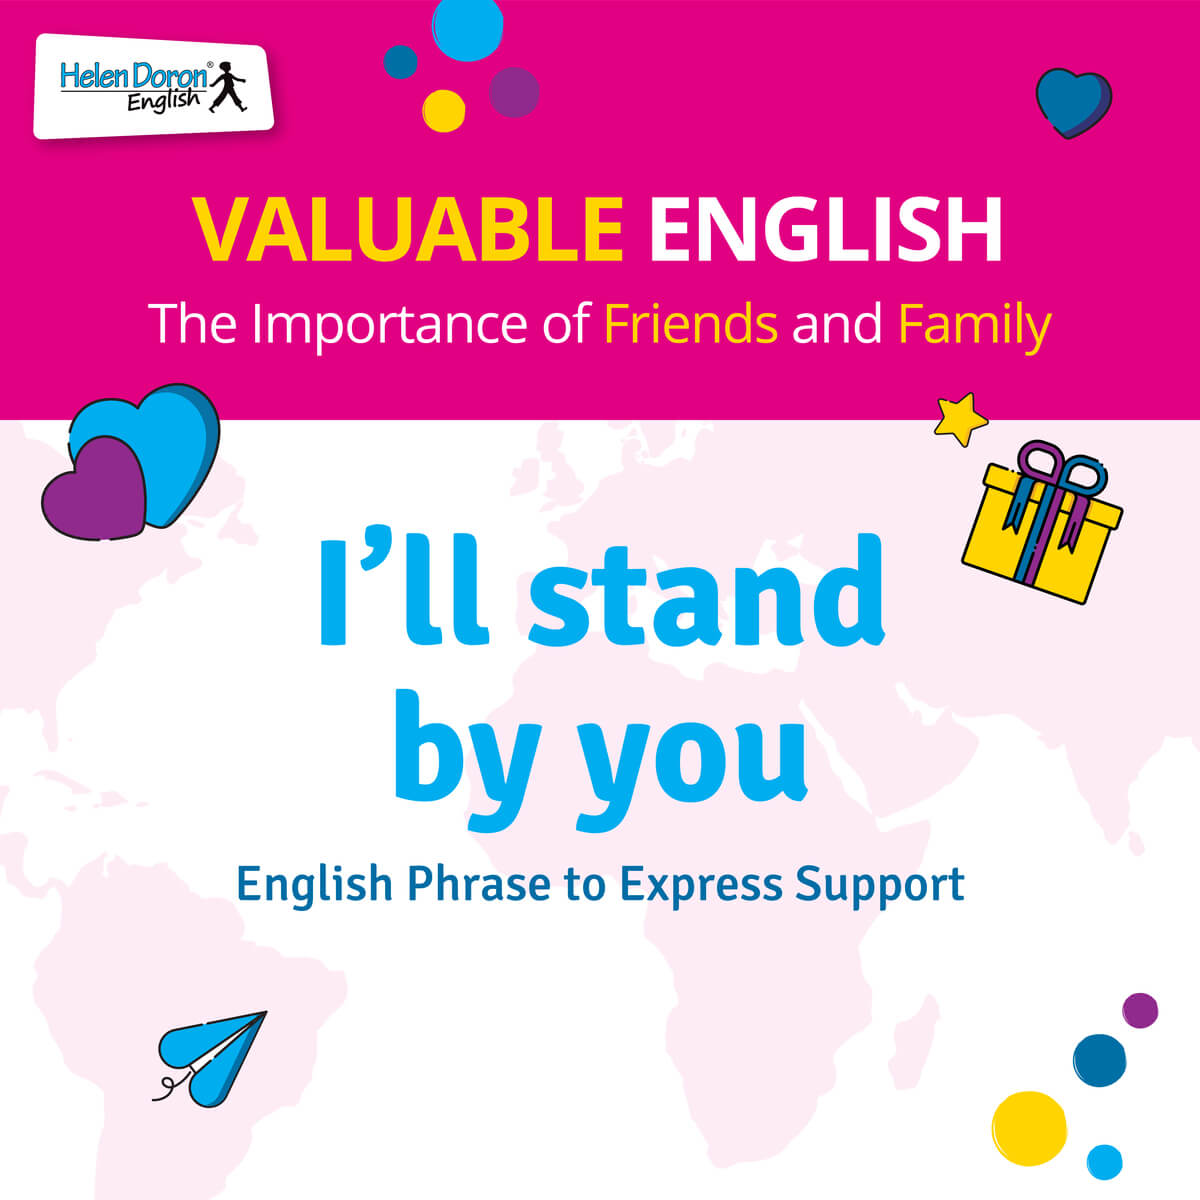 I'll stand by you - English phrases to express support